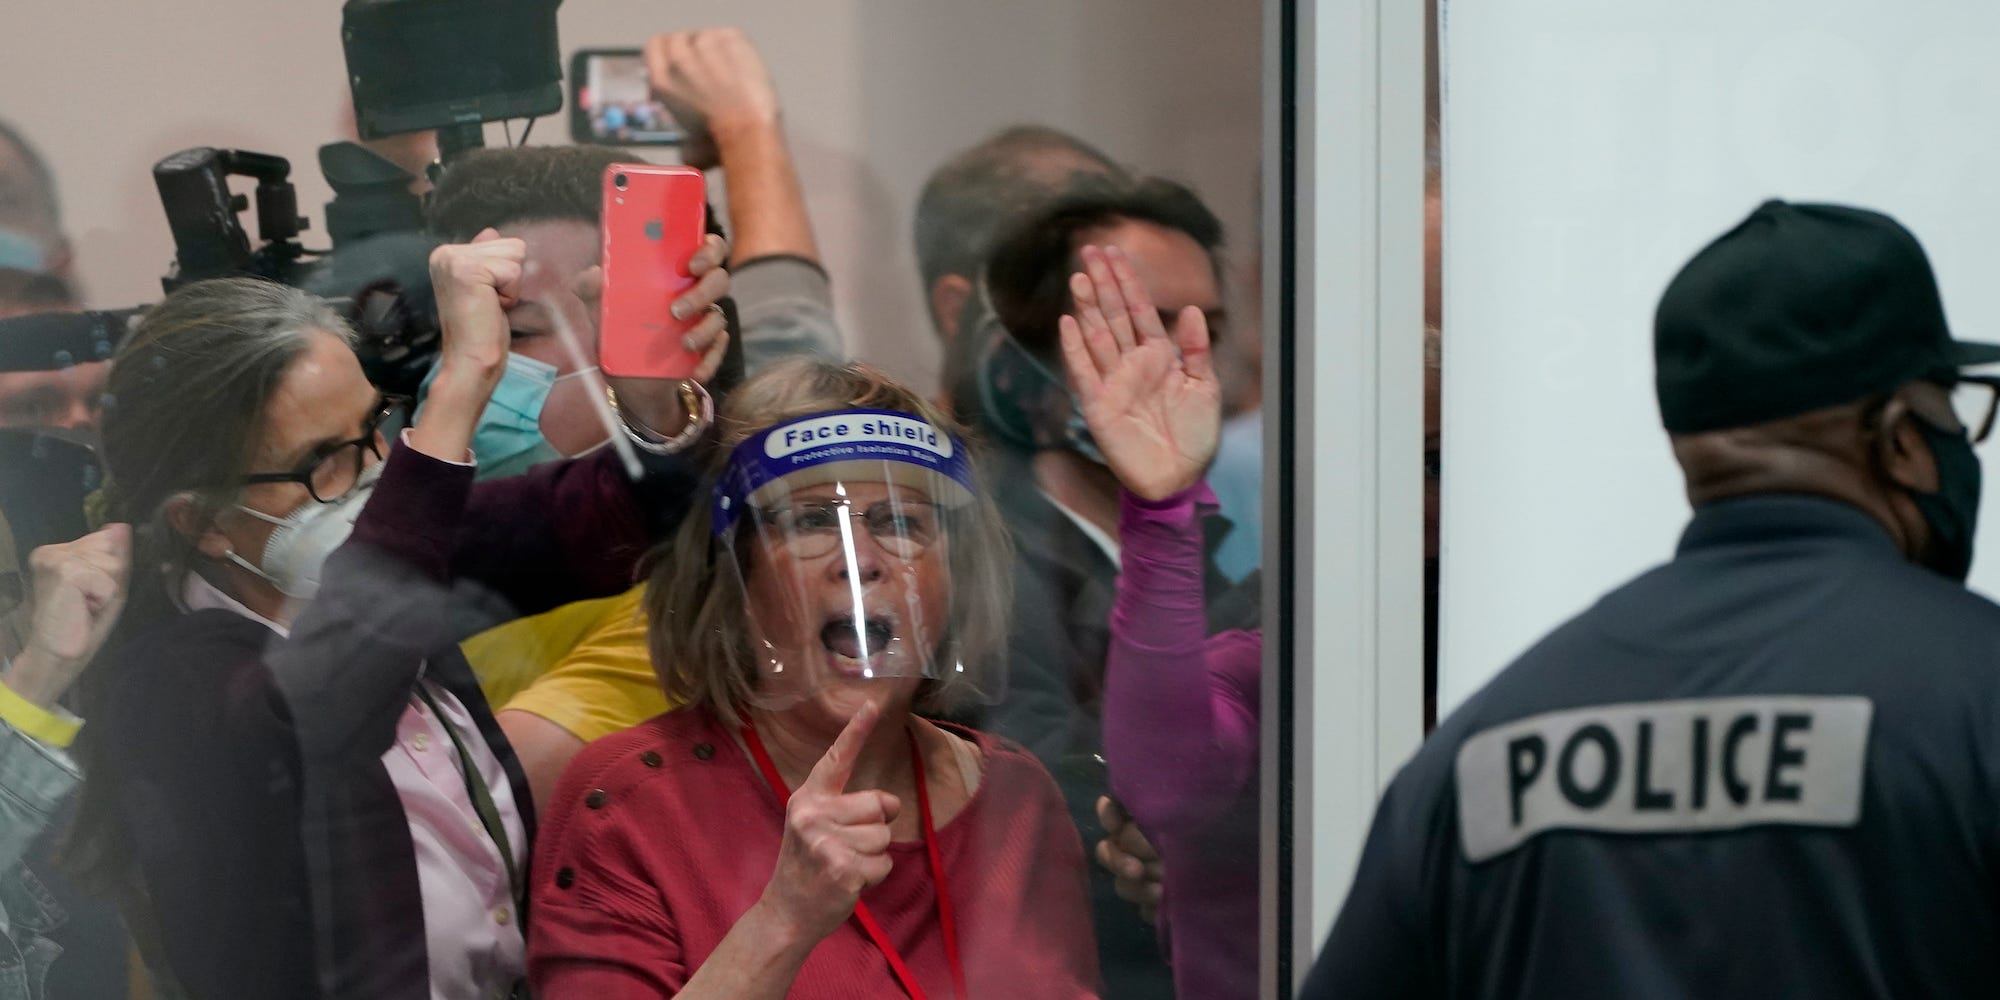 Surplus election challengers yell behind windows at the central counting board in Detroit, Michigan